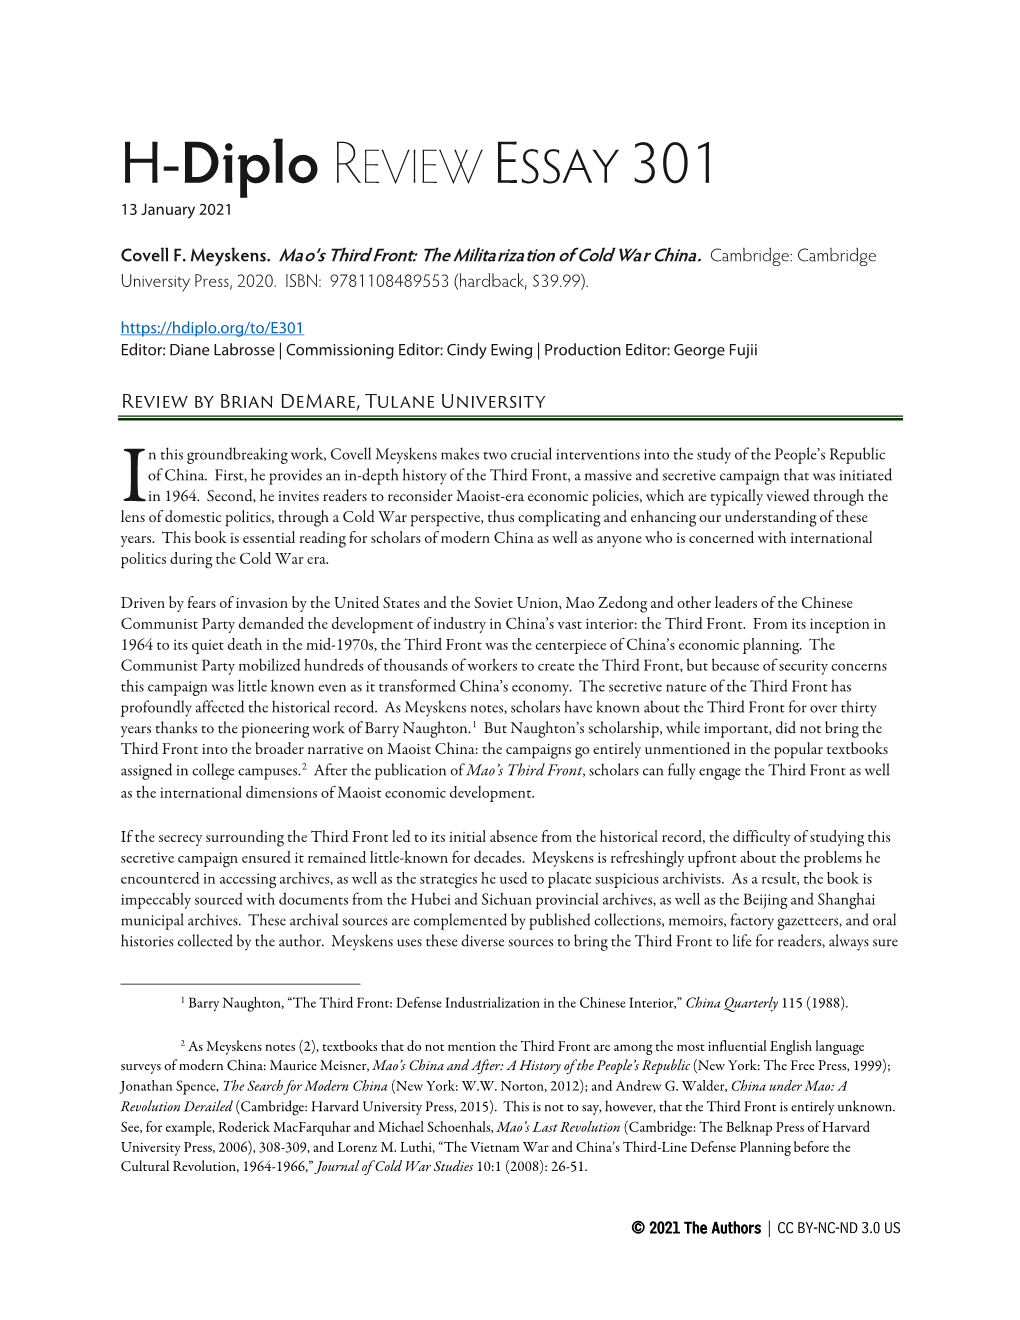 H-Diplo REVIEW ESSAY 301 13 January 2021